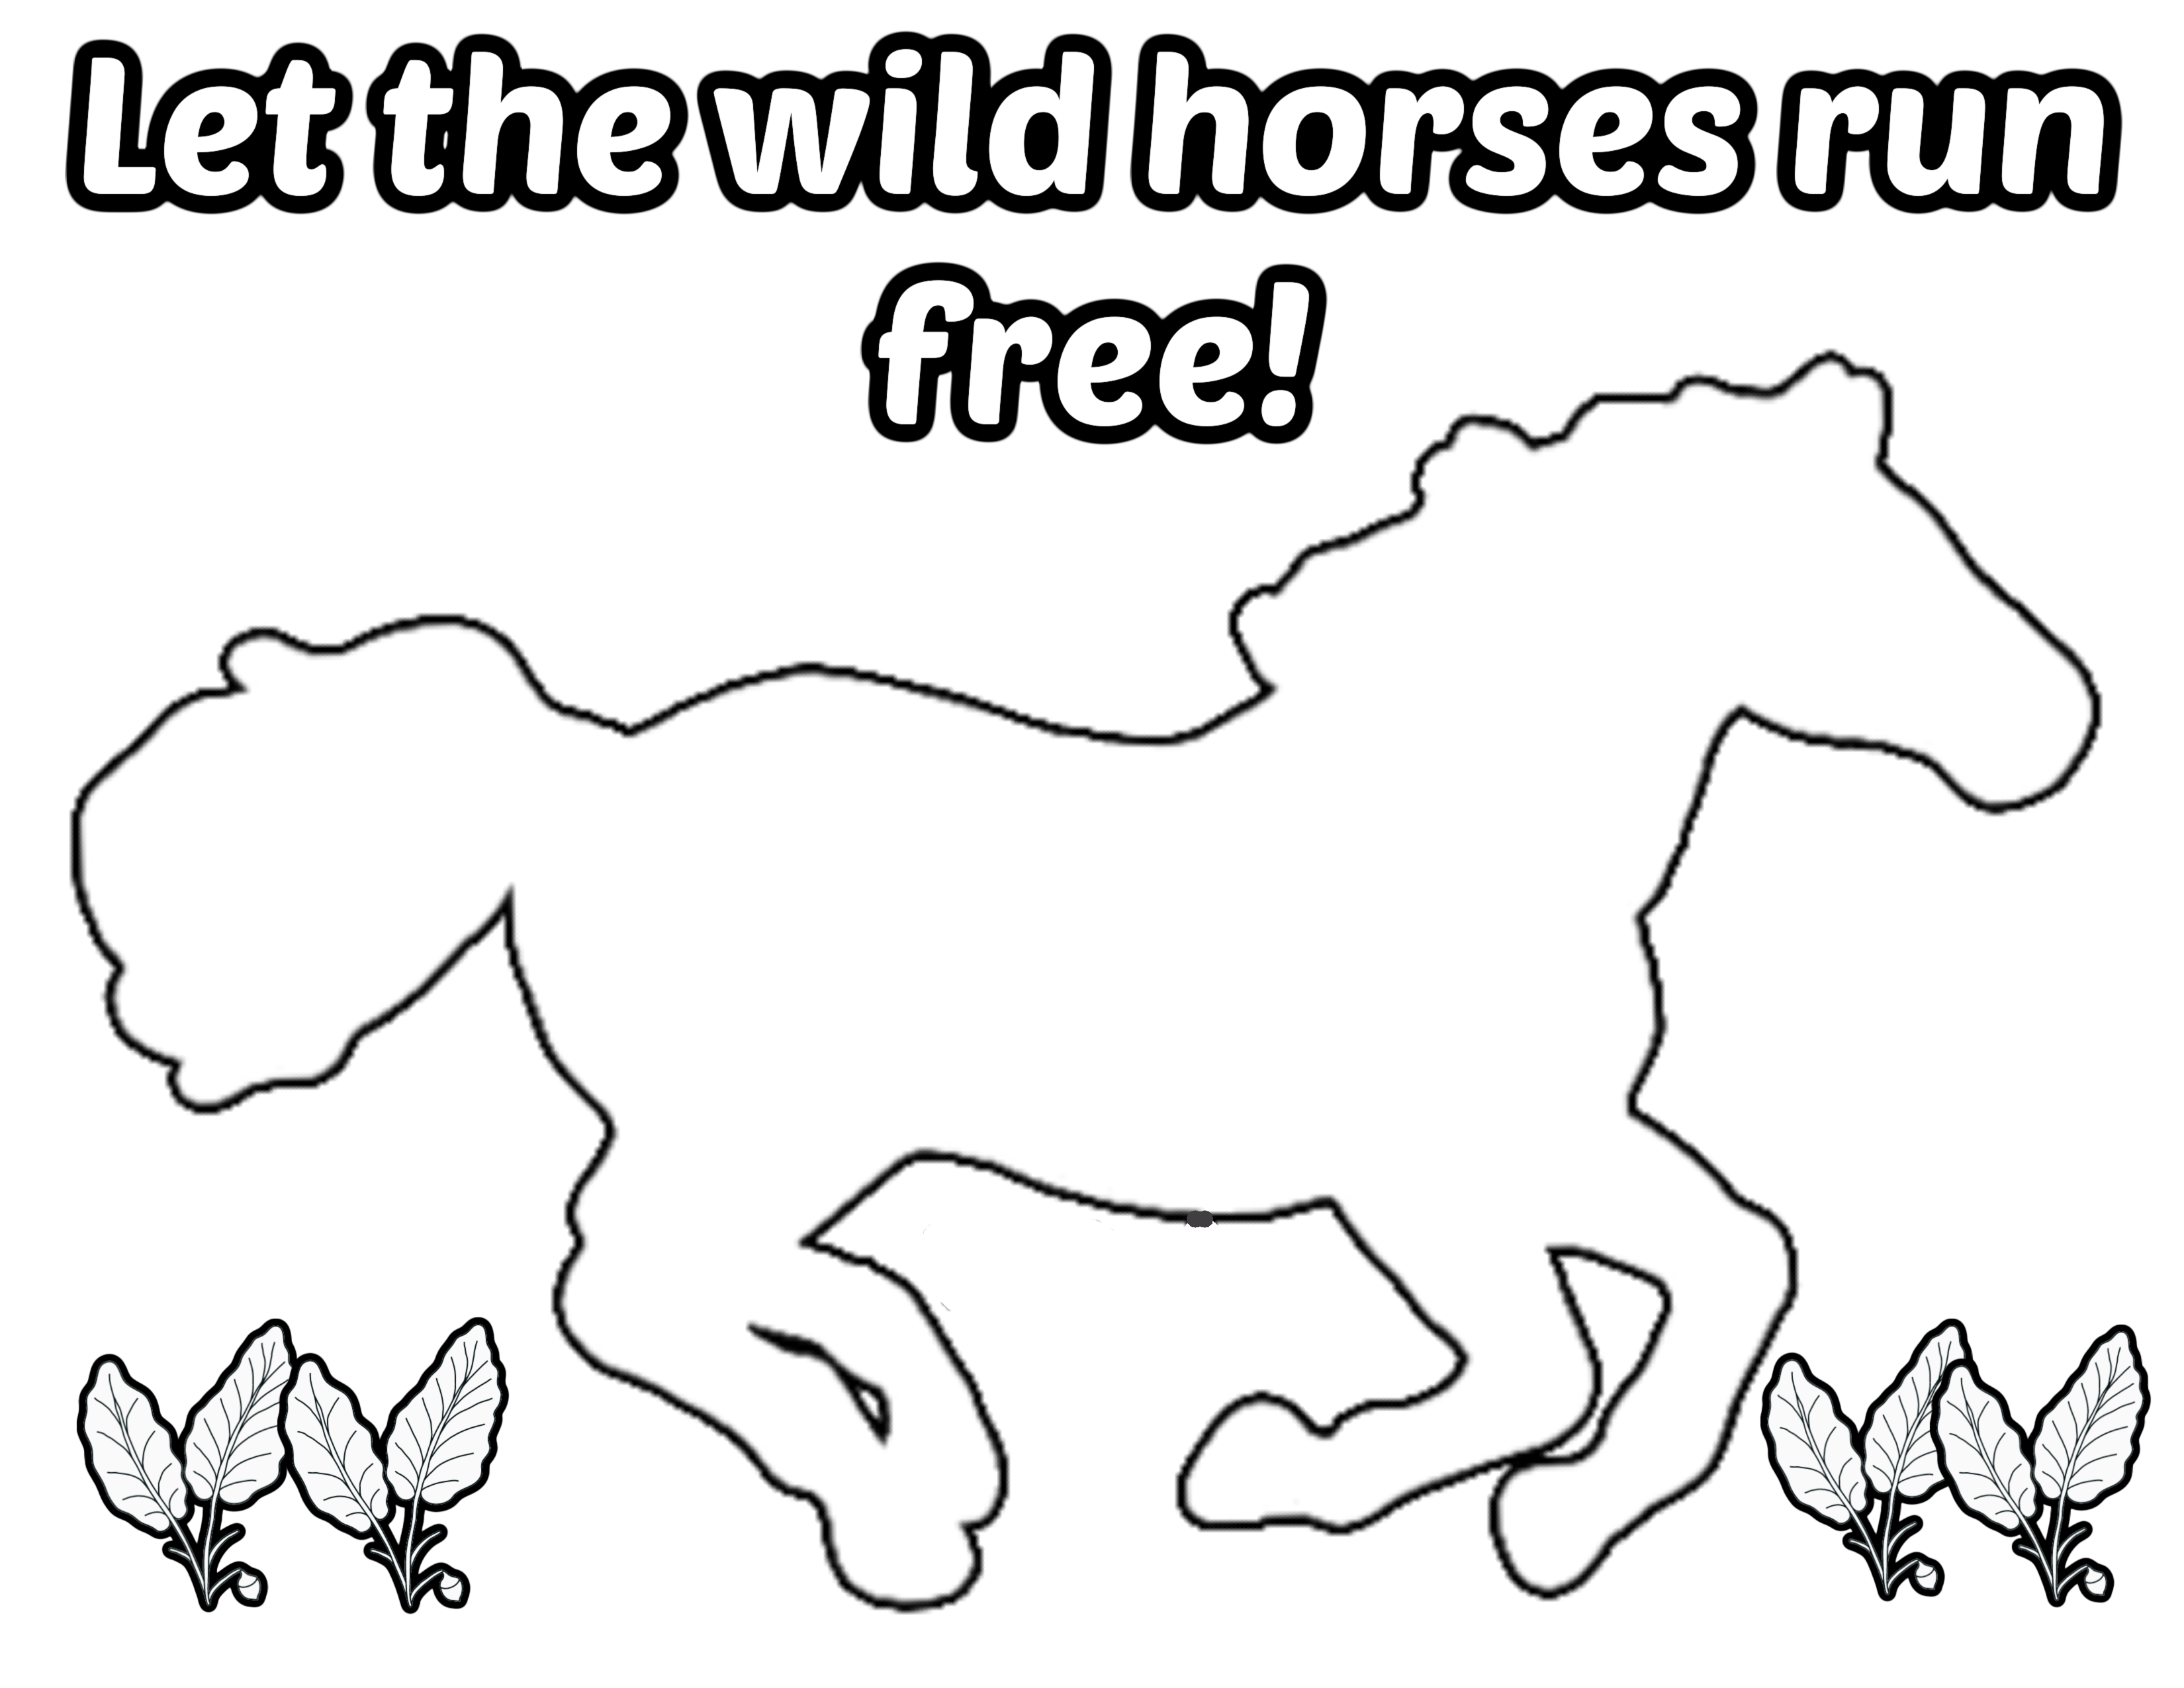 Wild horse coloring pages